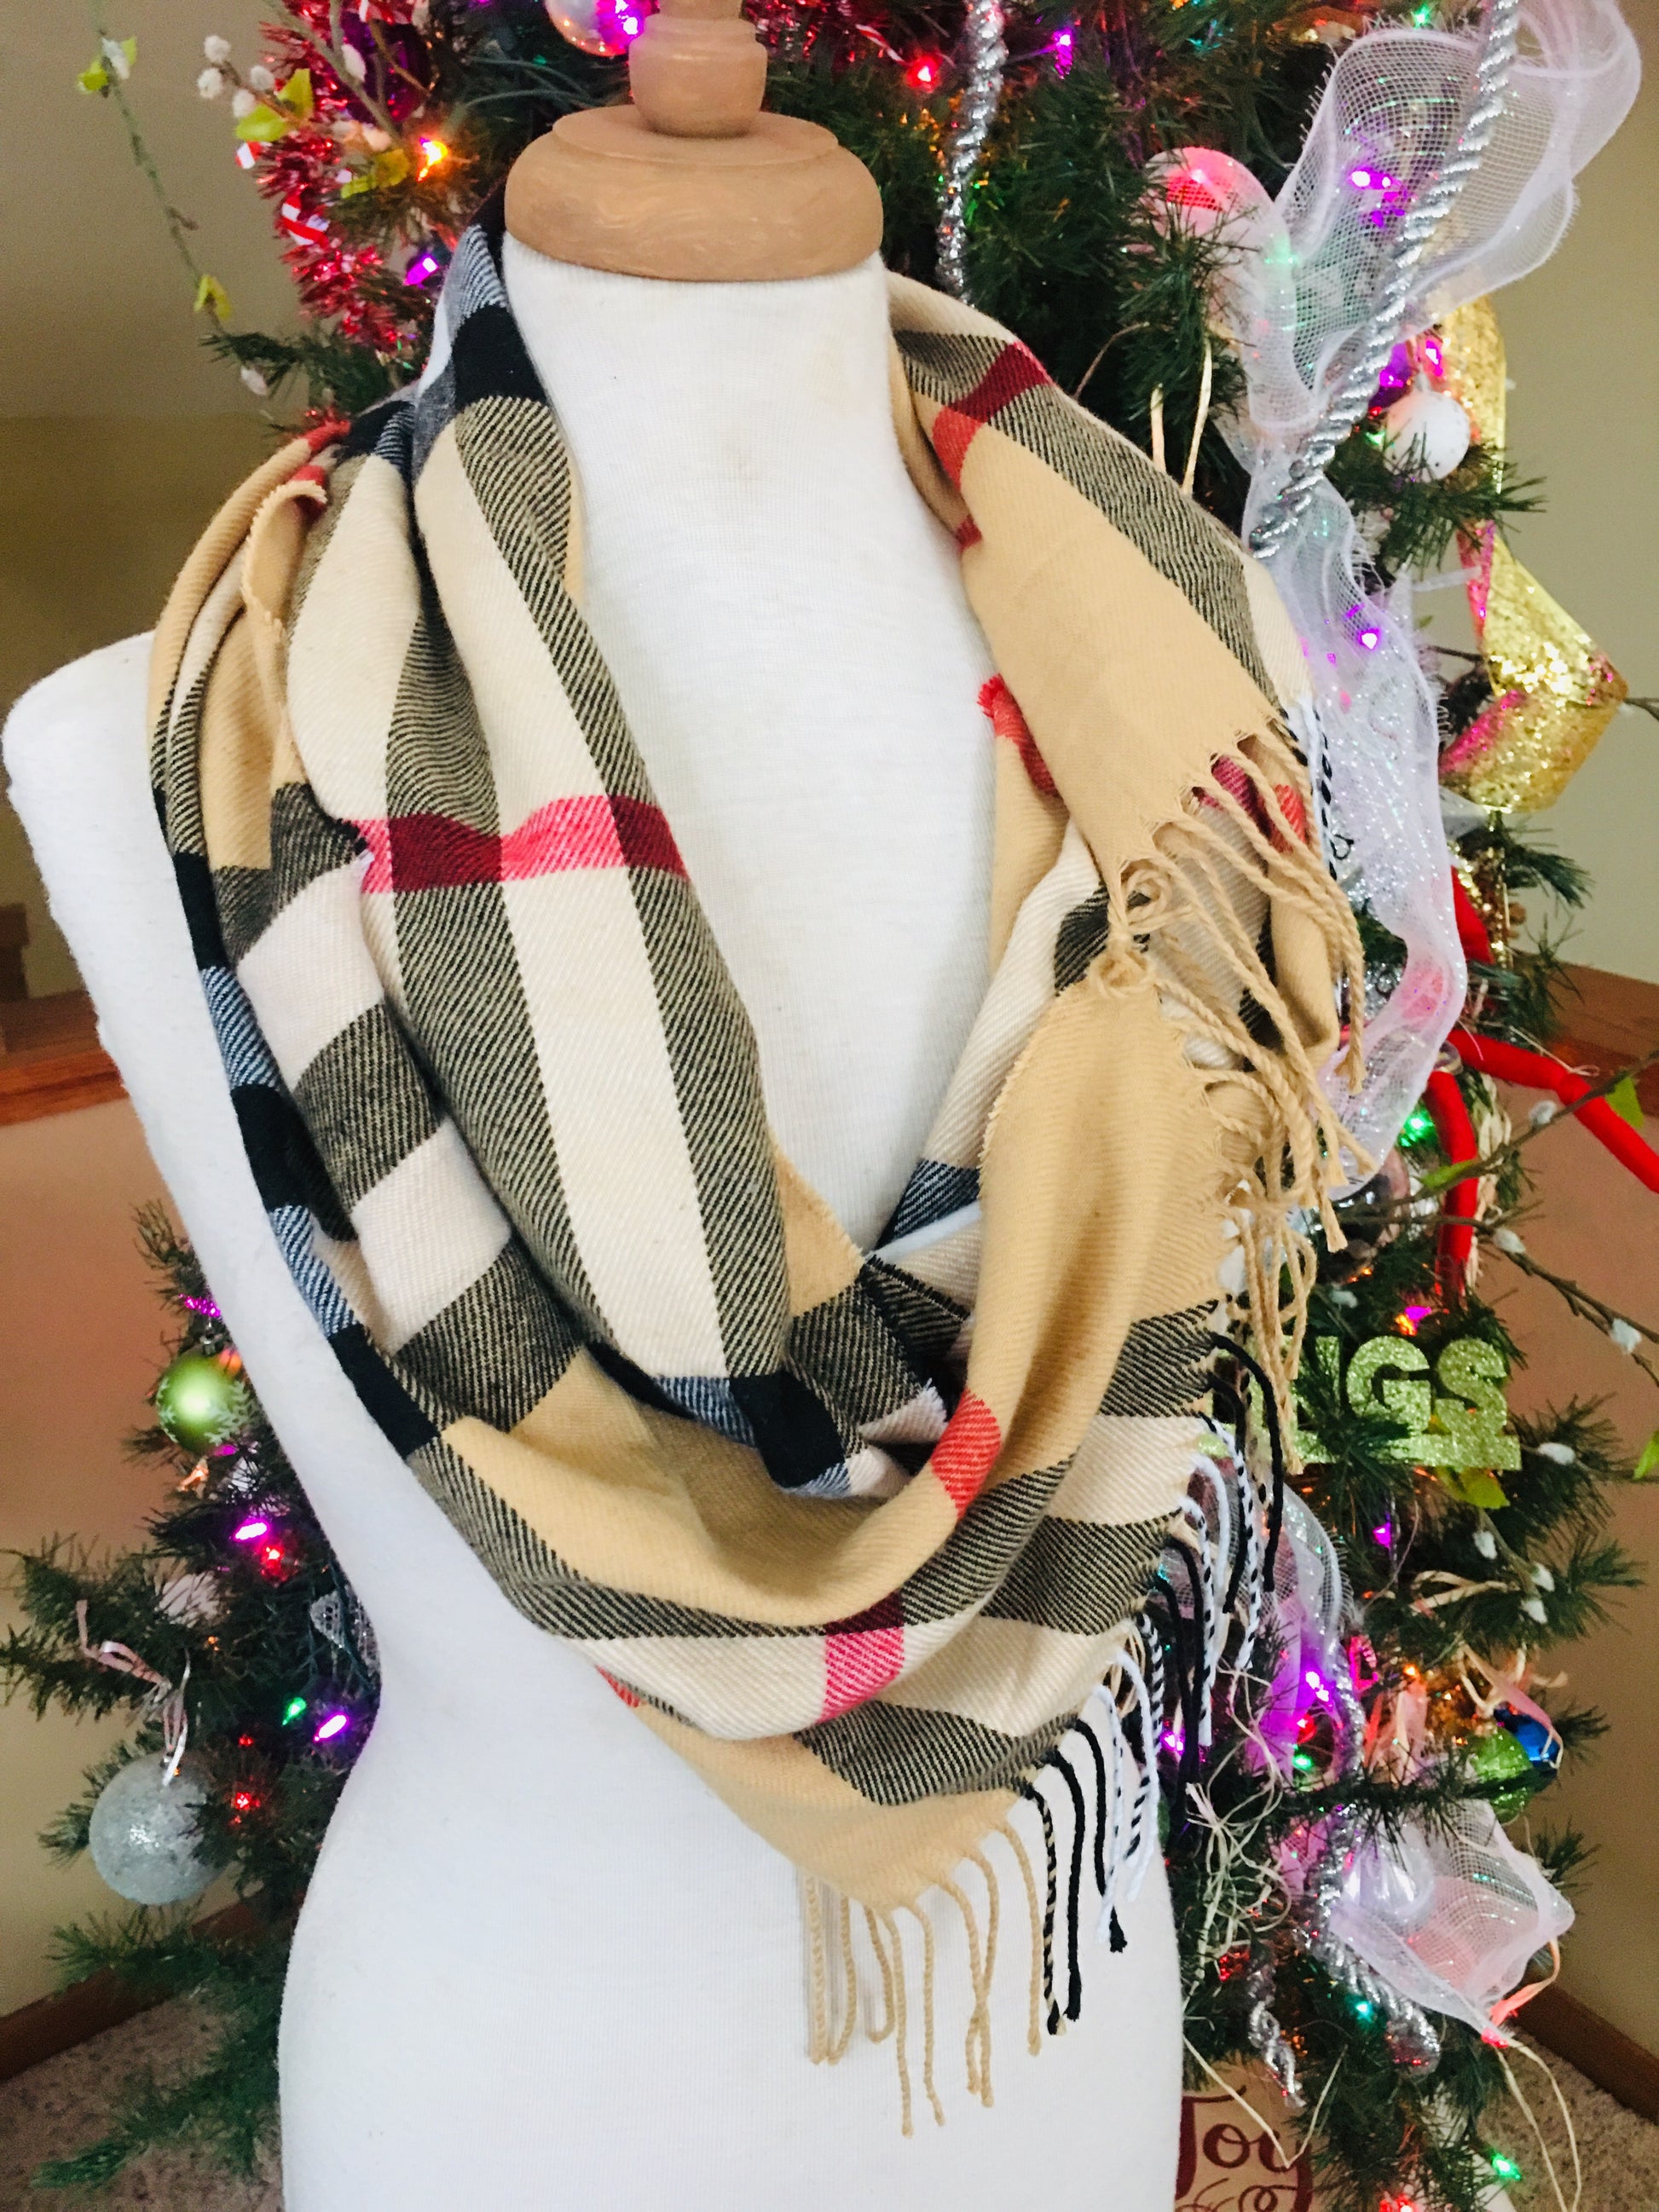 Scarf { Plaid, classic check, camel } Long. Tie end to make infinity. - Stacy's Pink Martini Boutique